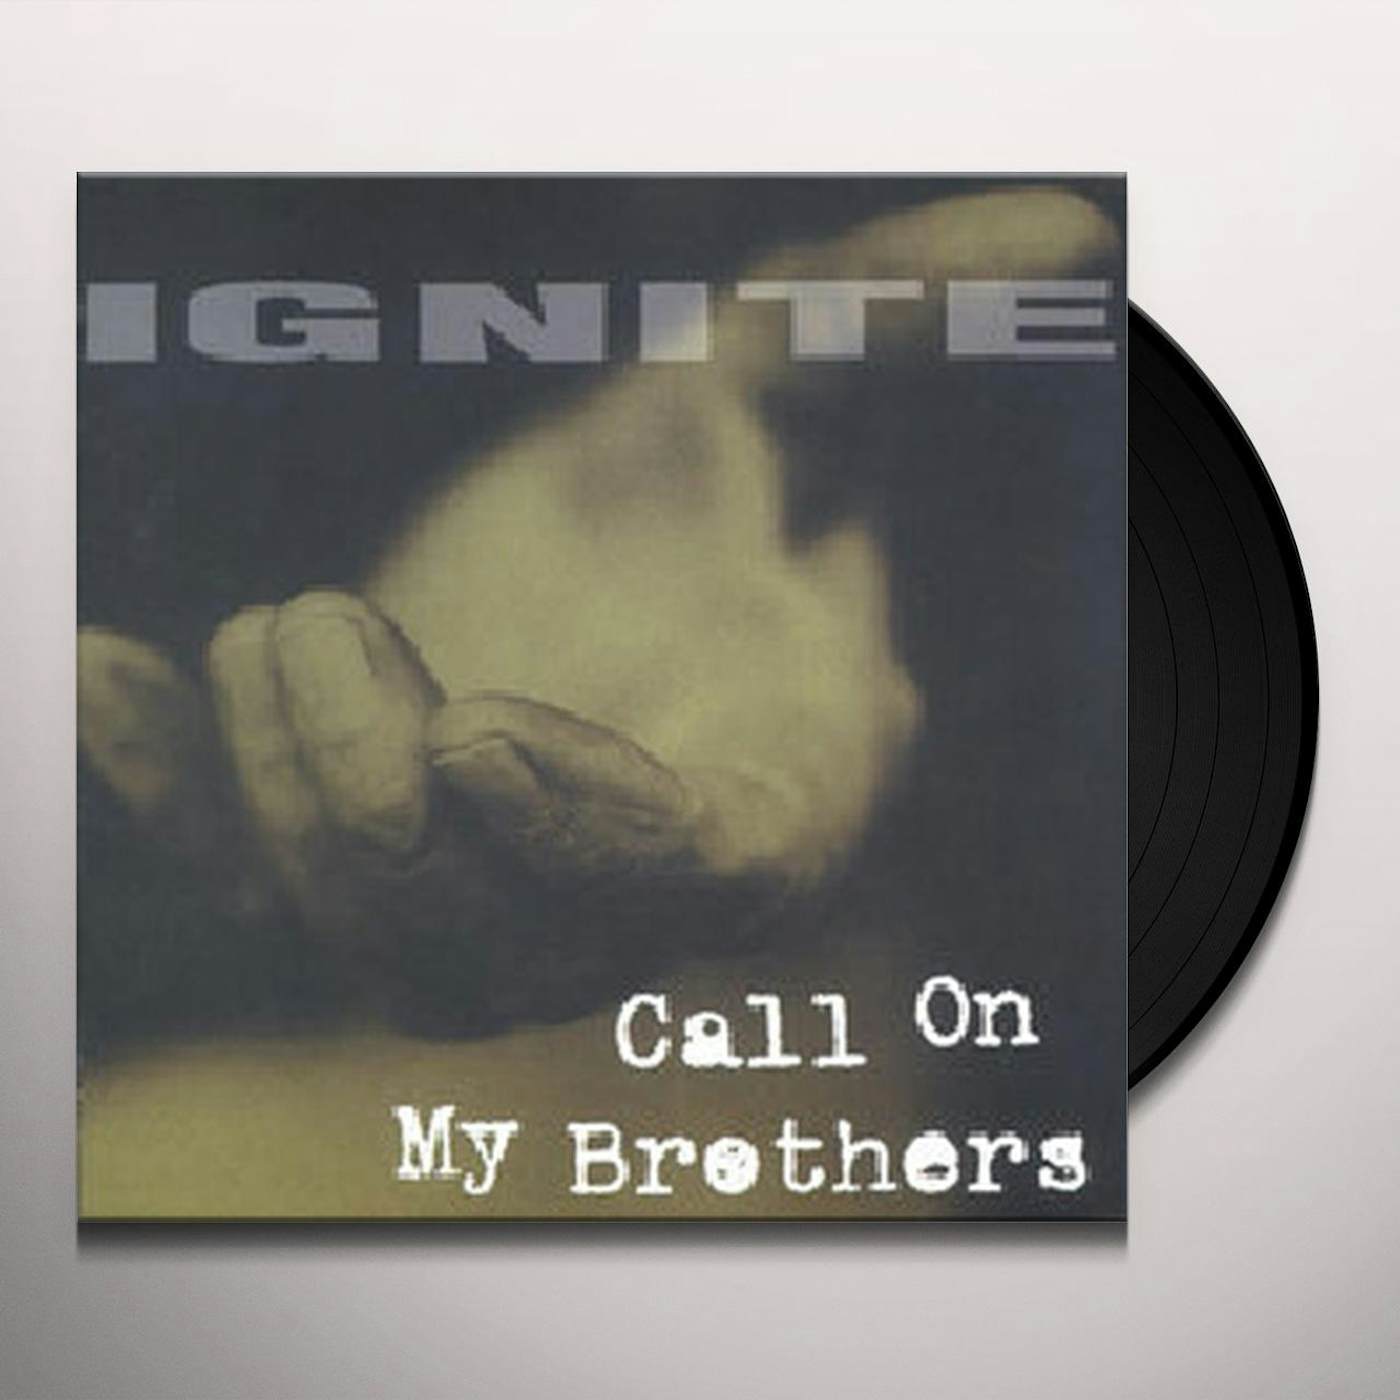 Ignite Call On My Brothers Vinyl Record